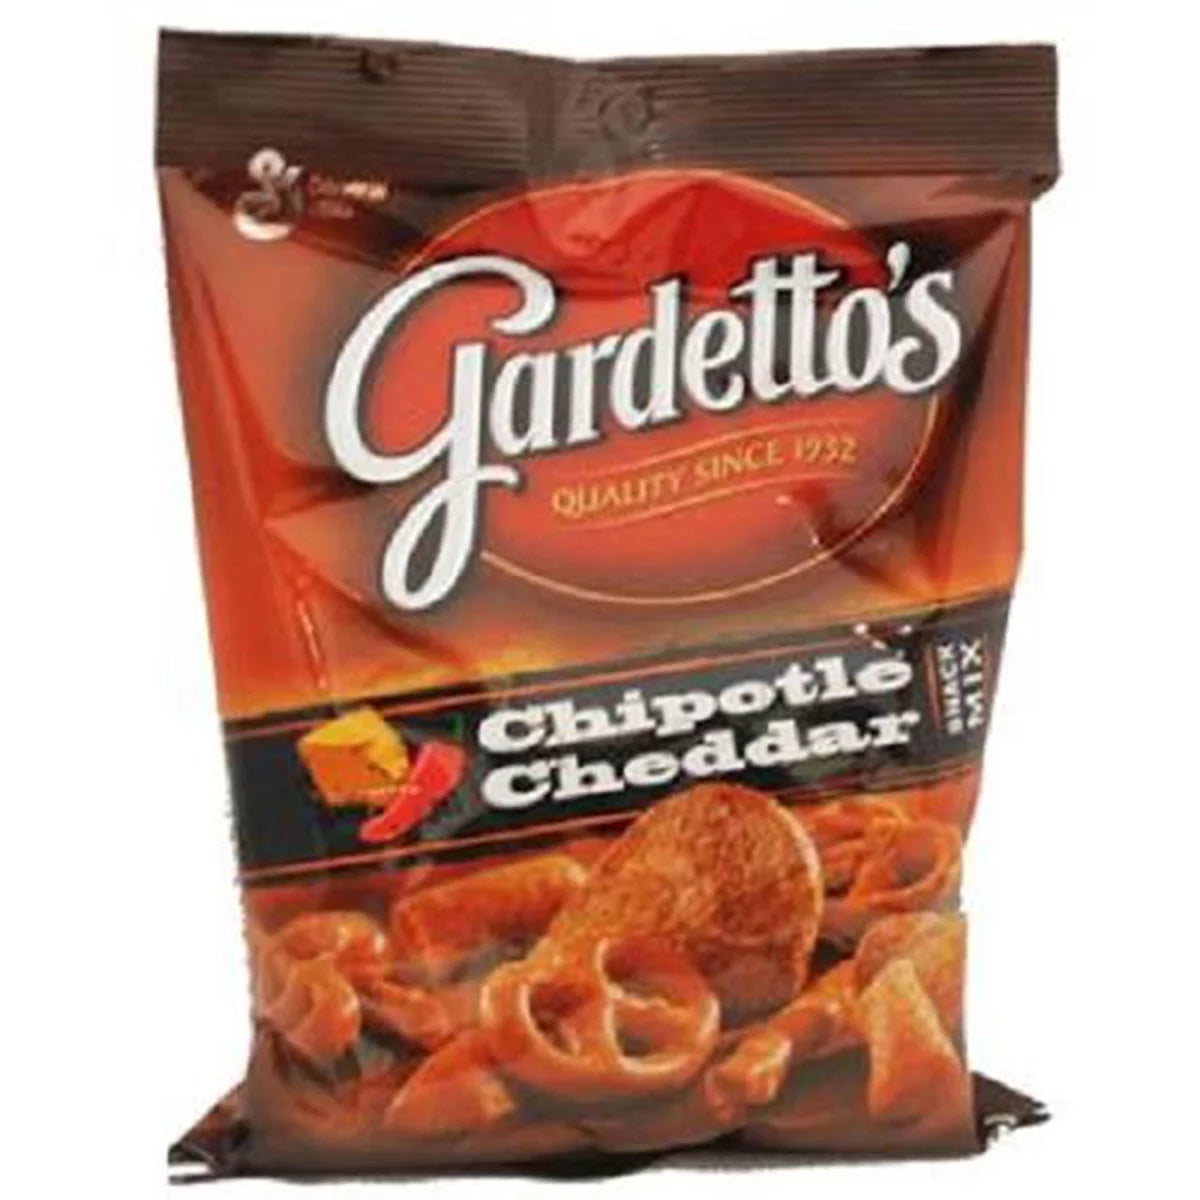 Gardetto's Chipotle Cheddar Snack Mix: 7 Bags of- Tj